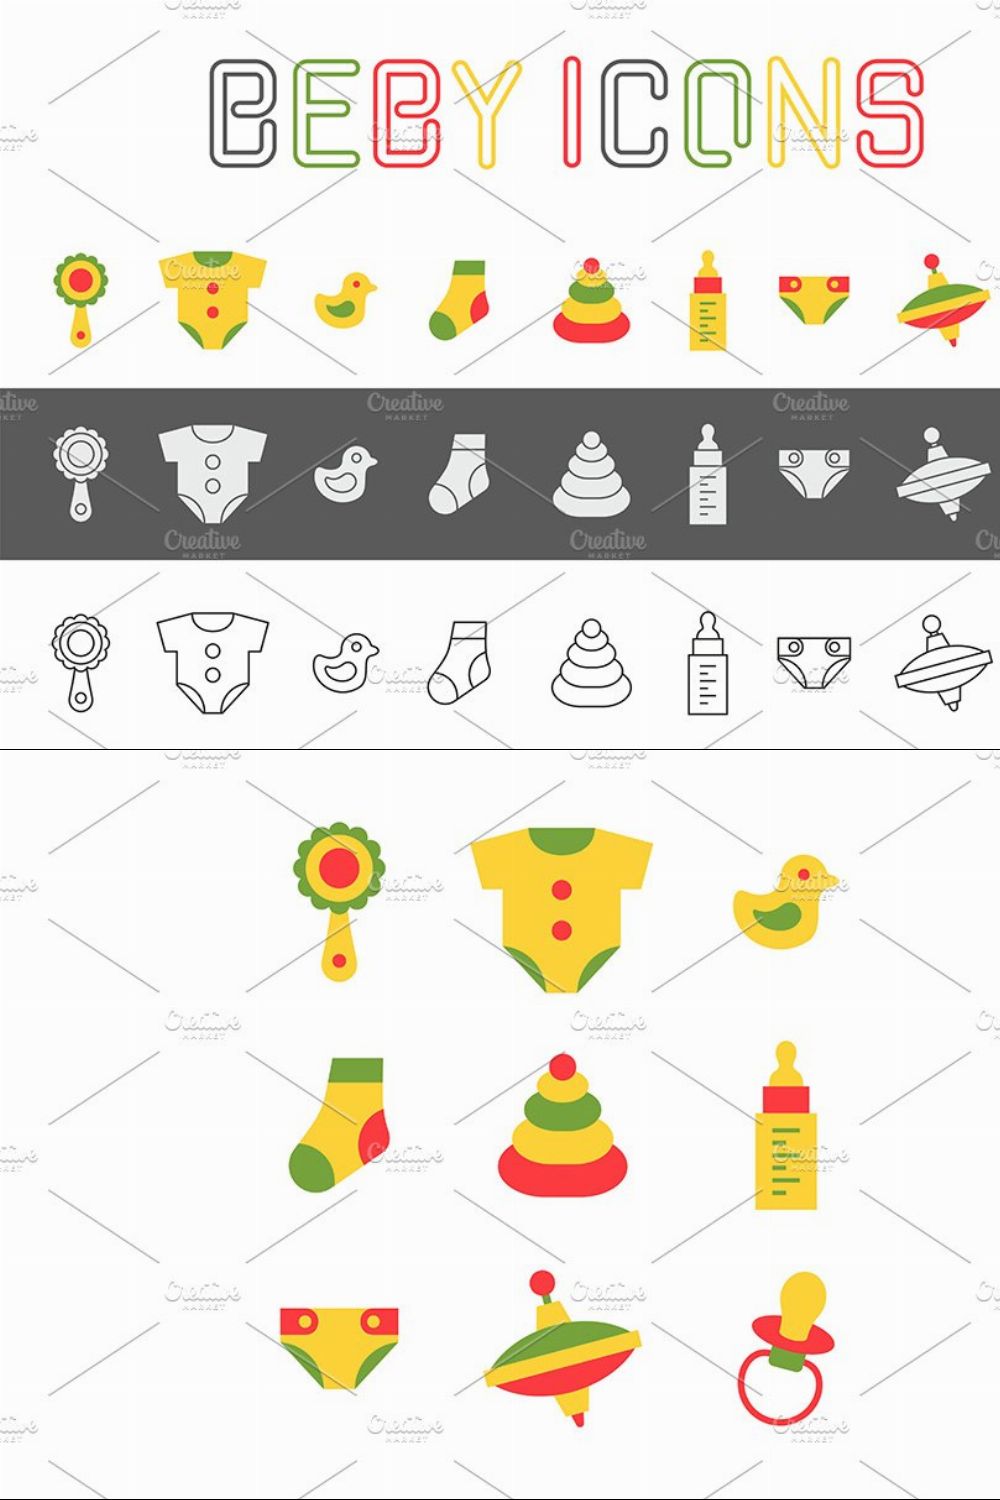 Baby things icons set pinterest preview image.